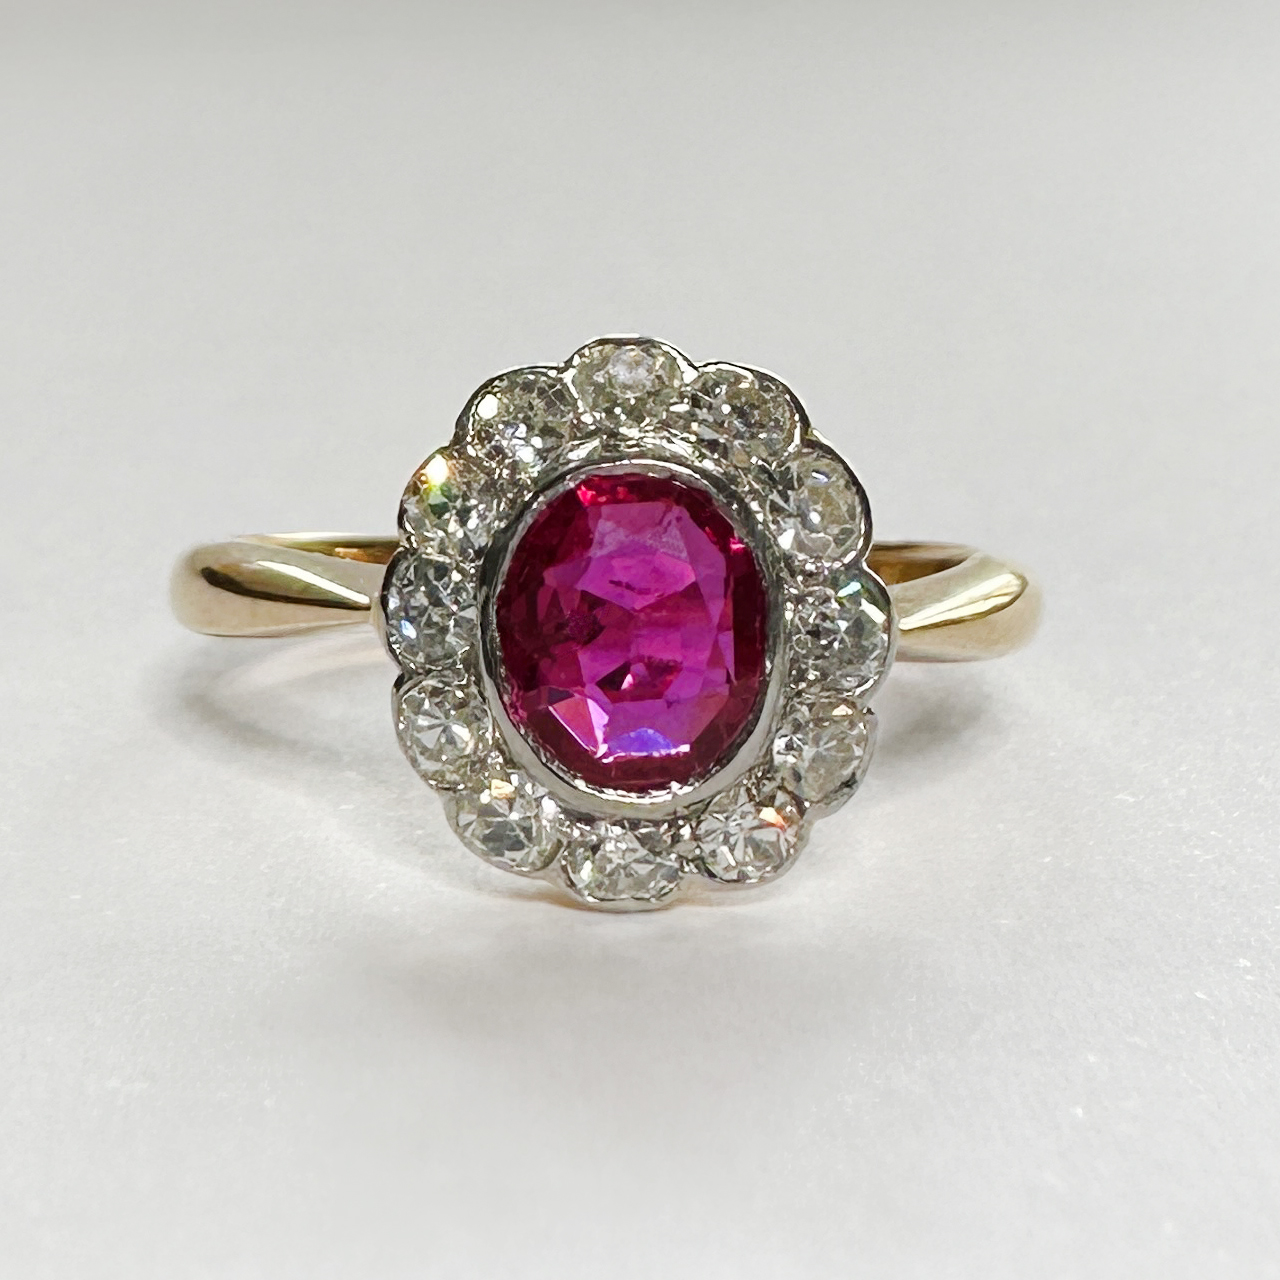 Antique Burma Ruby and Diamond Oval Cluster Ring in 18ct  yellow gold shank, the gems are set in platinum. This exquisite ring has a central natural, unheated Burma ruby and is surrounded by 12 Edwardian bright eight cut diamonds with a total carat weight of 0.50cts. 